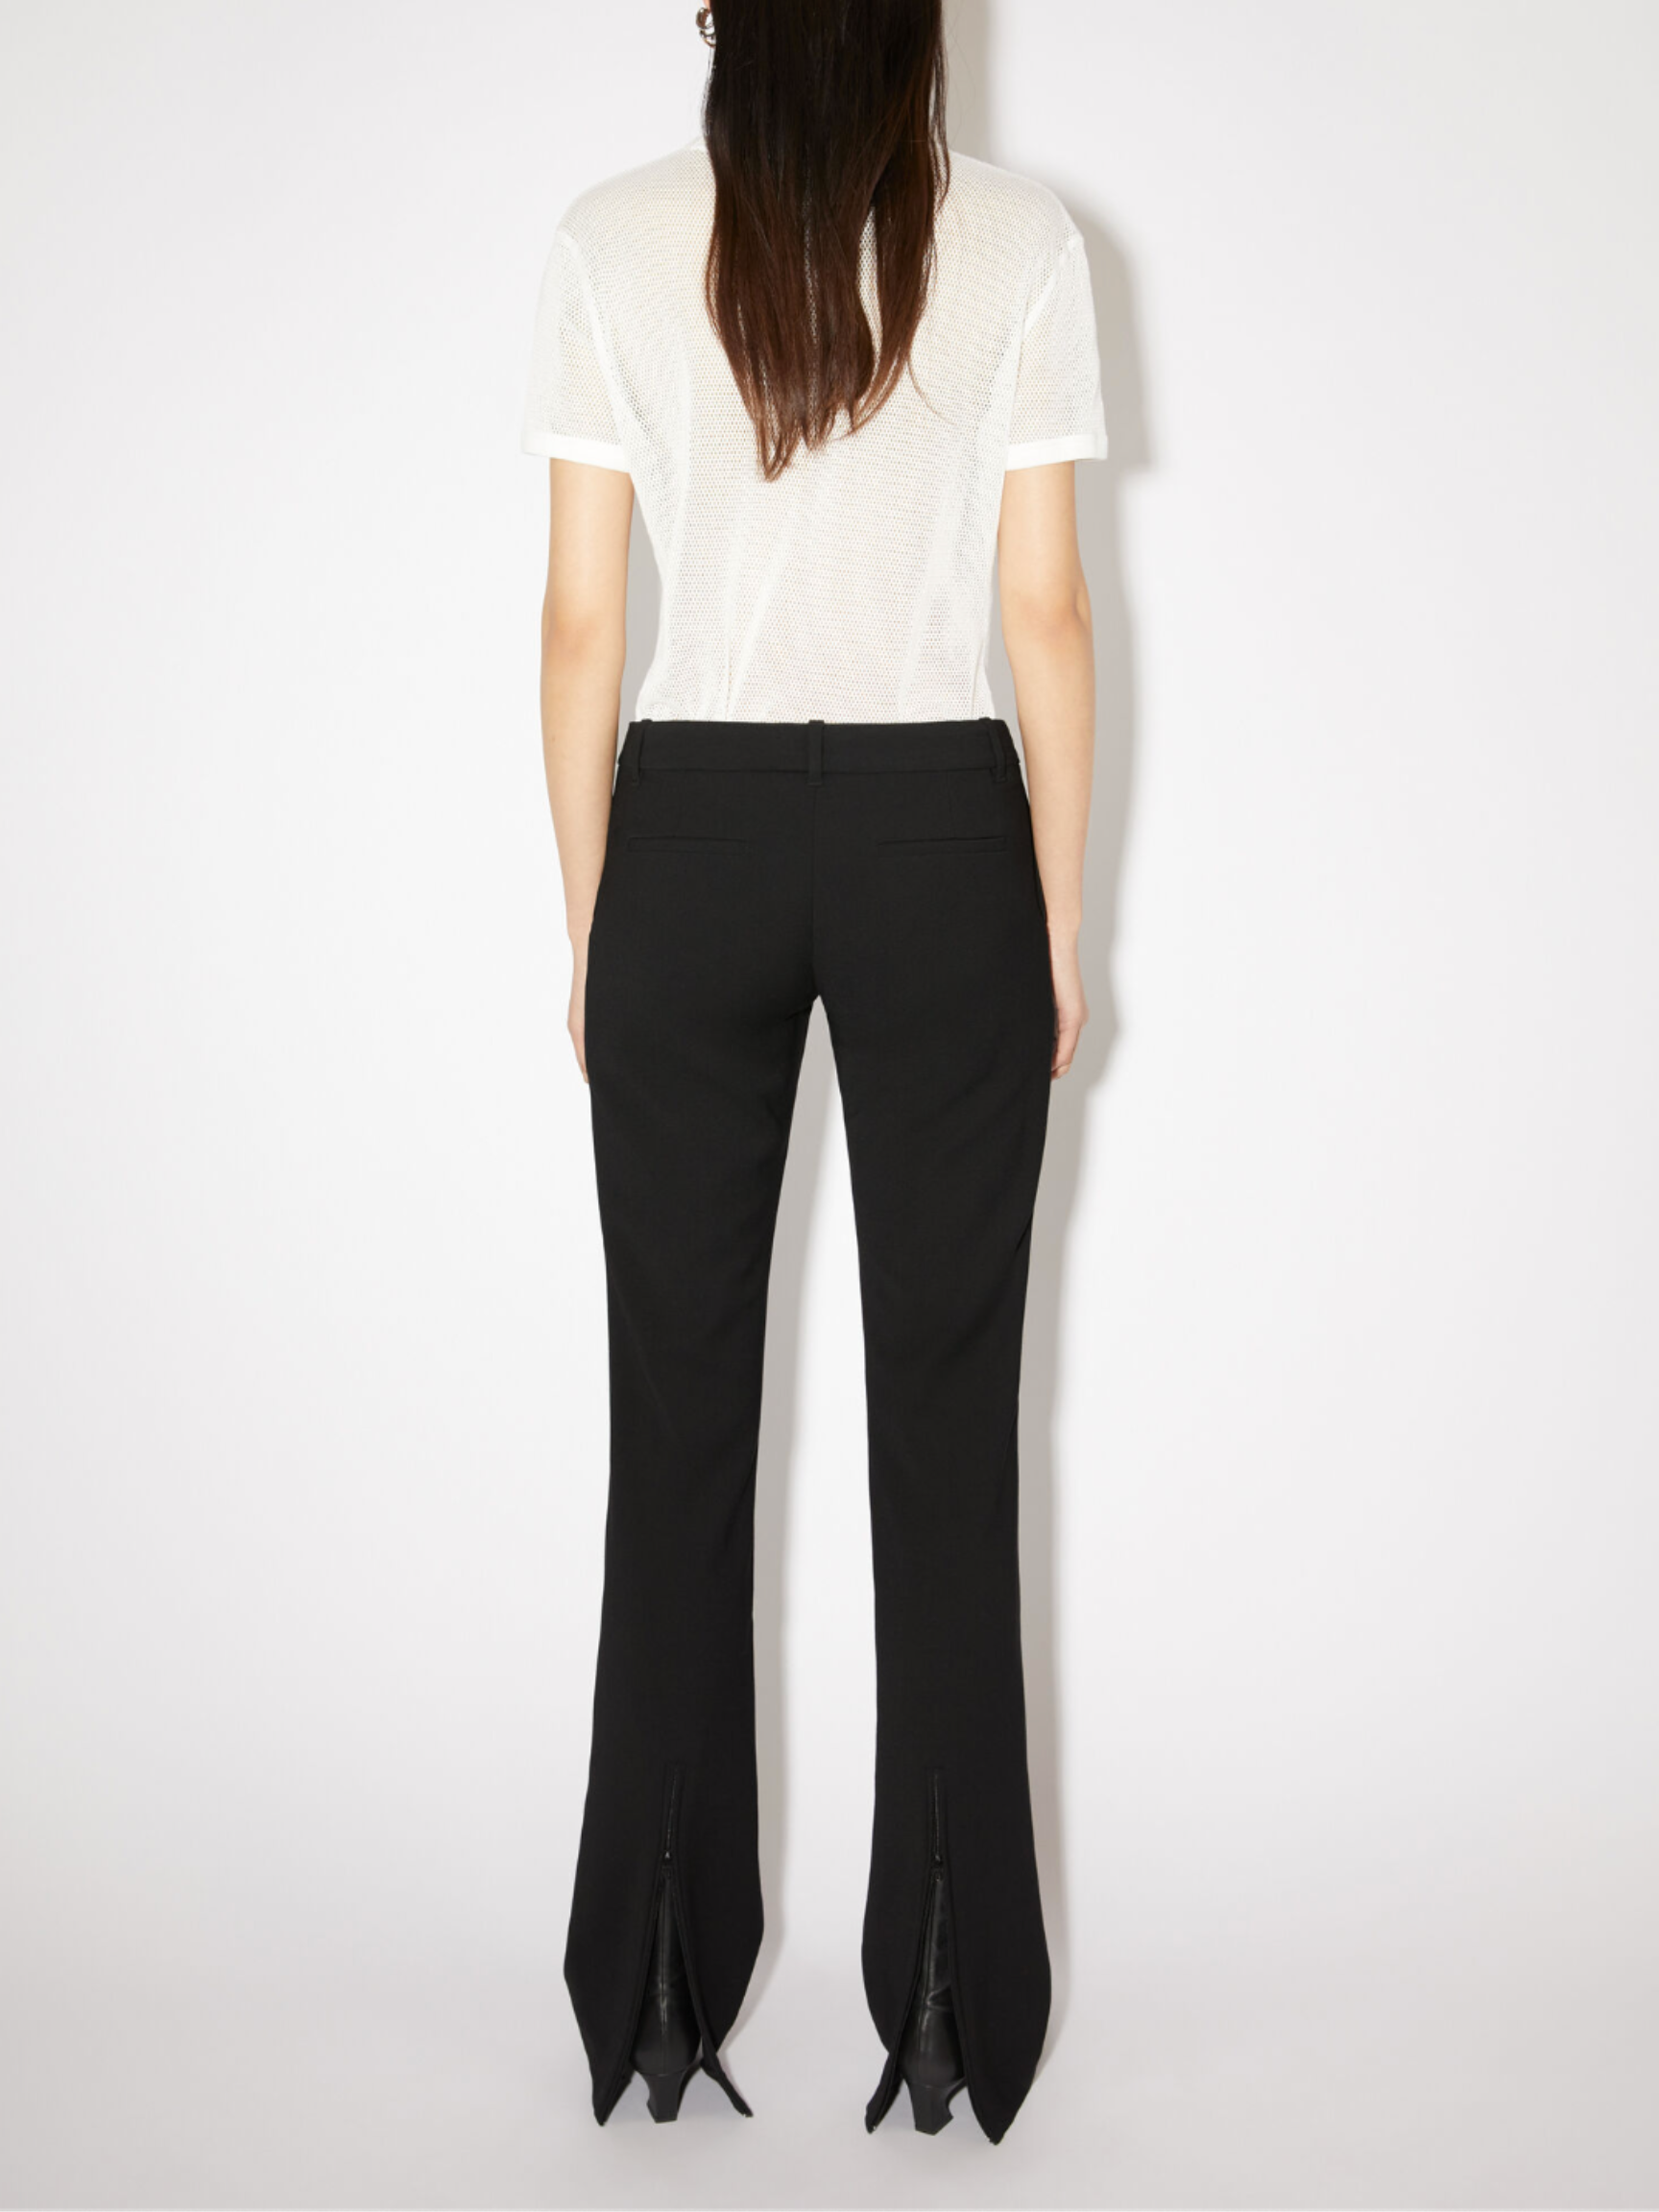 Tailored Wool Blend Trousers